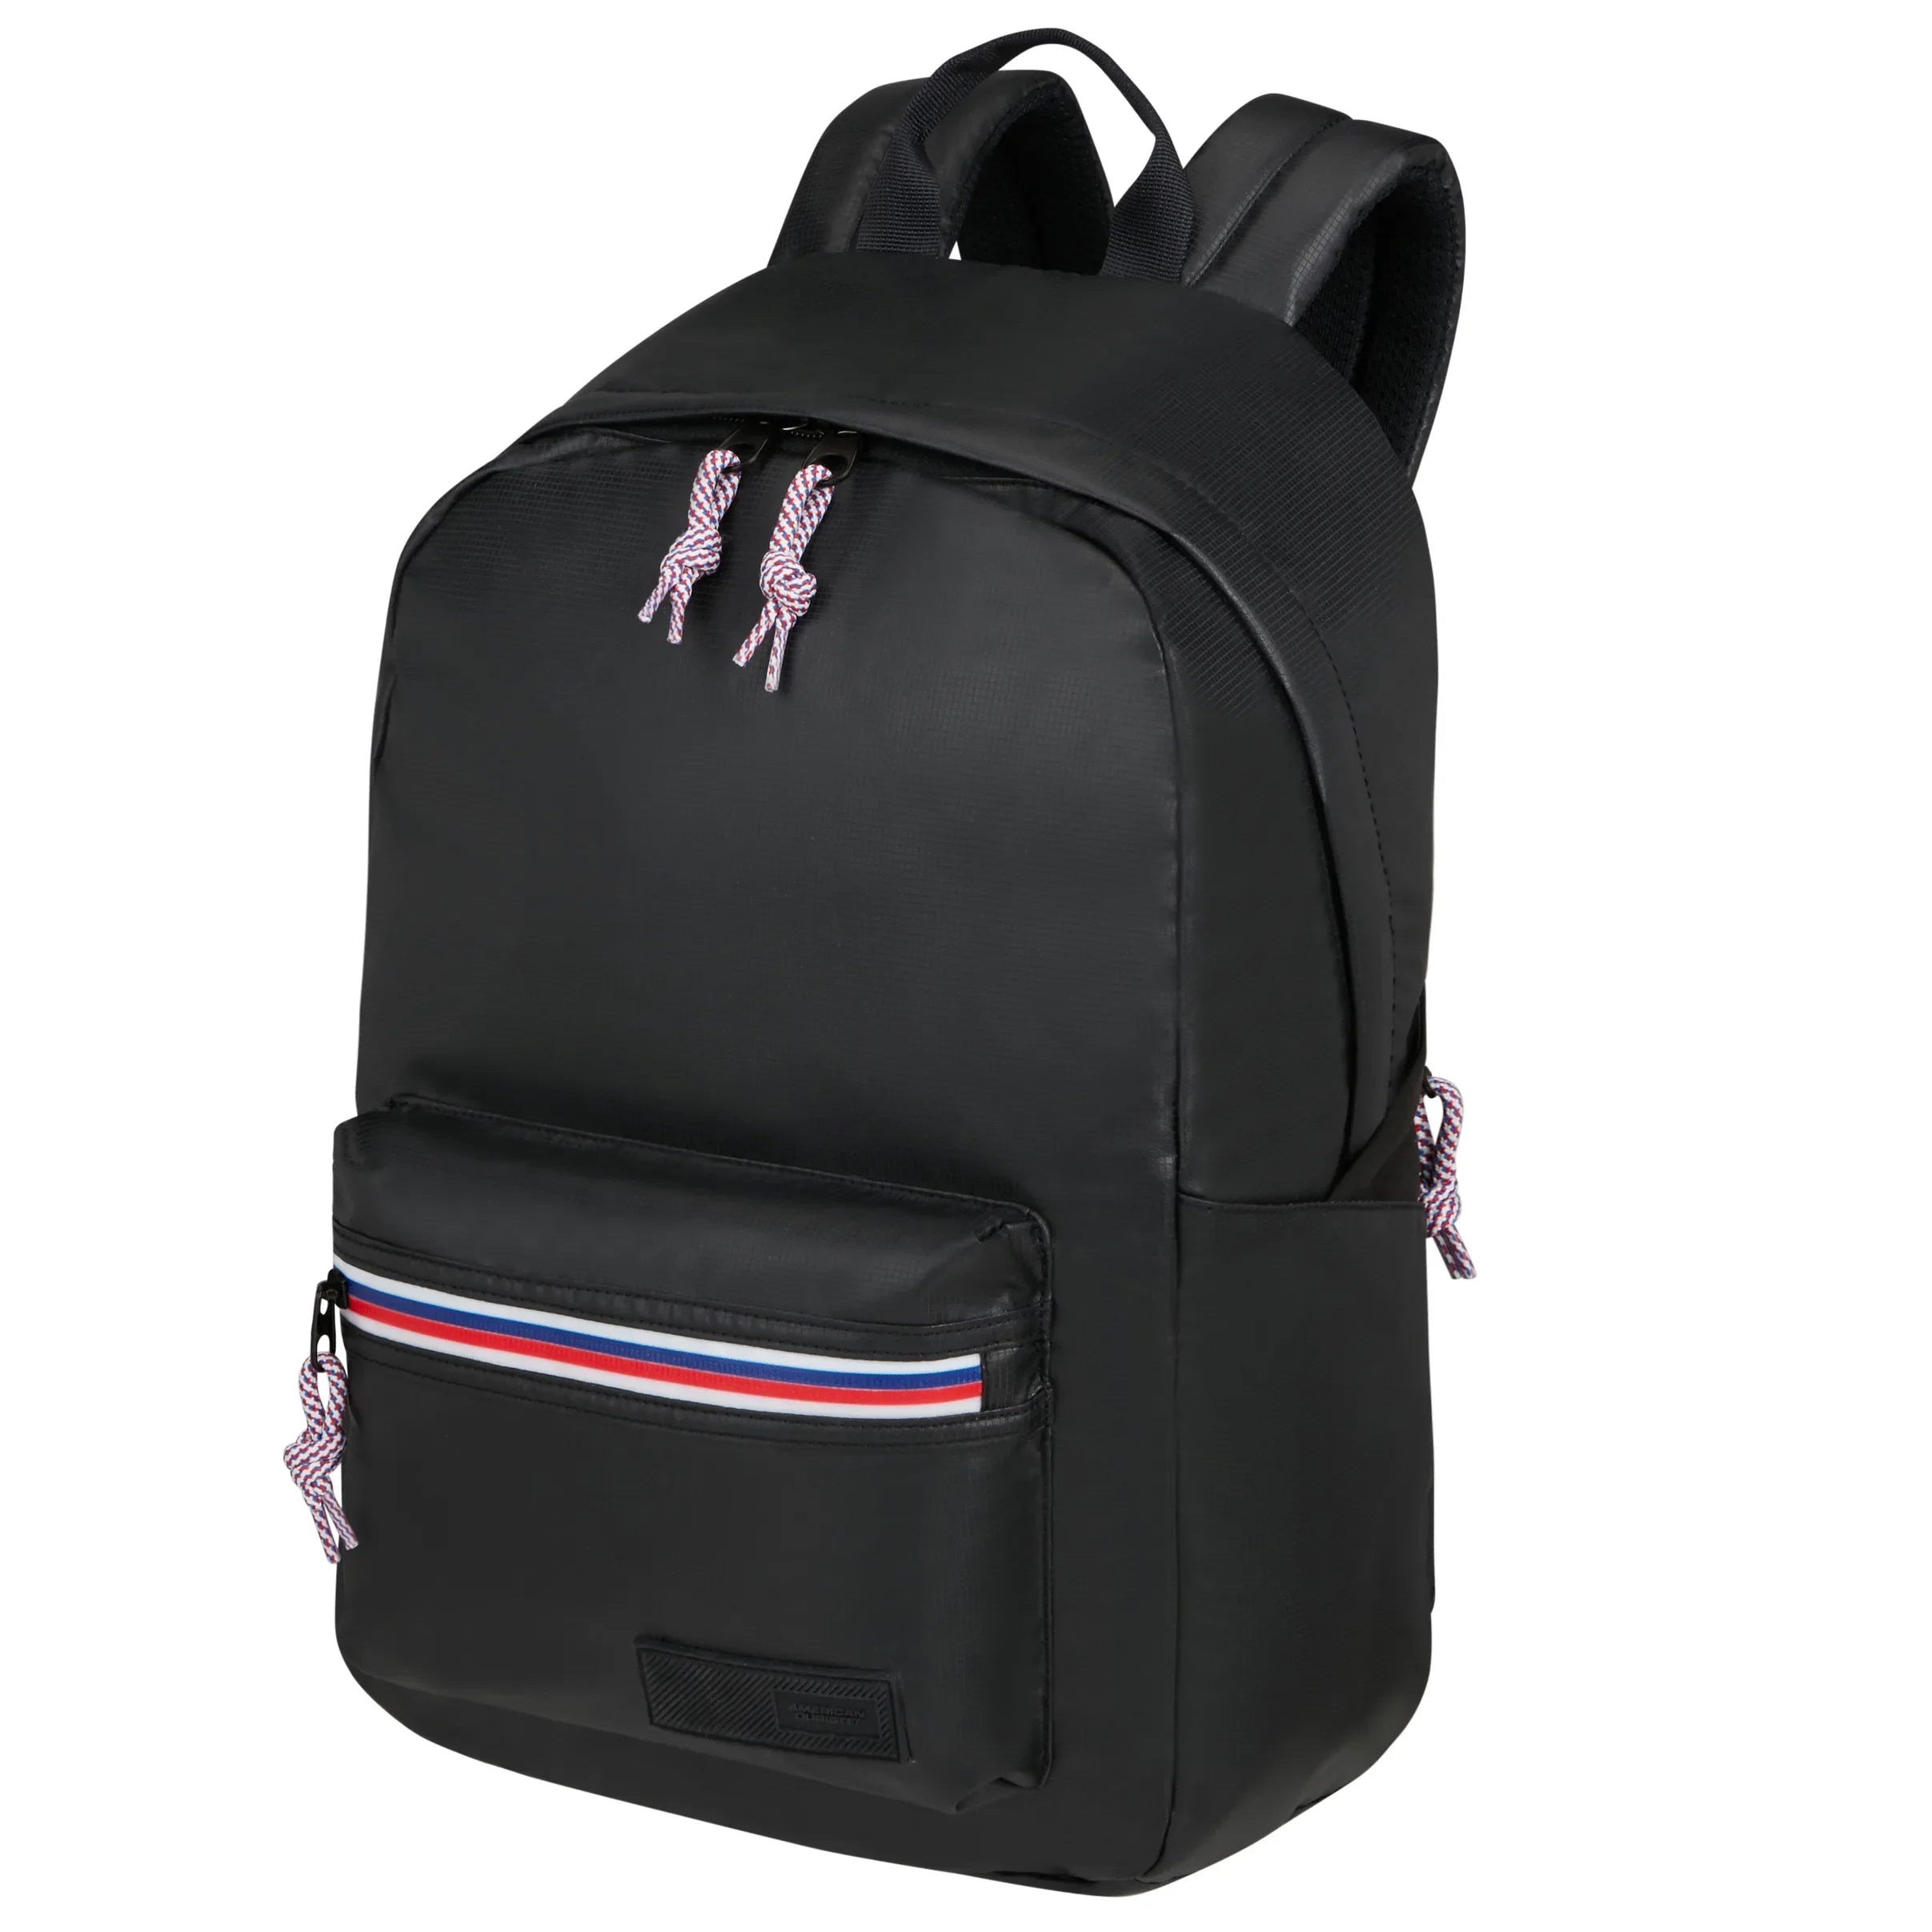 American Tourister Upbeat Pro coated backpack 43 cm - Black